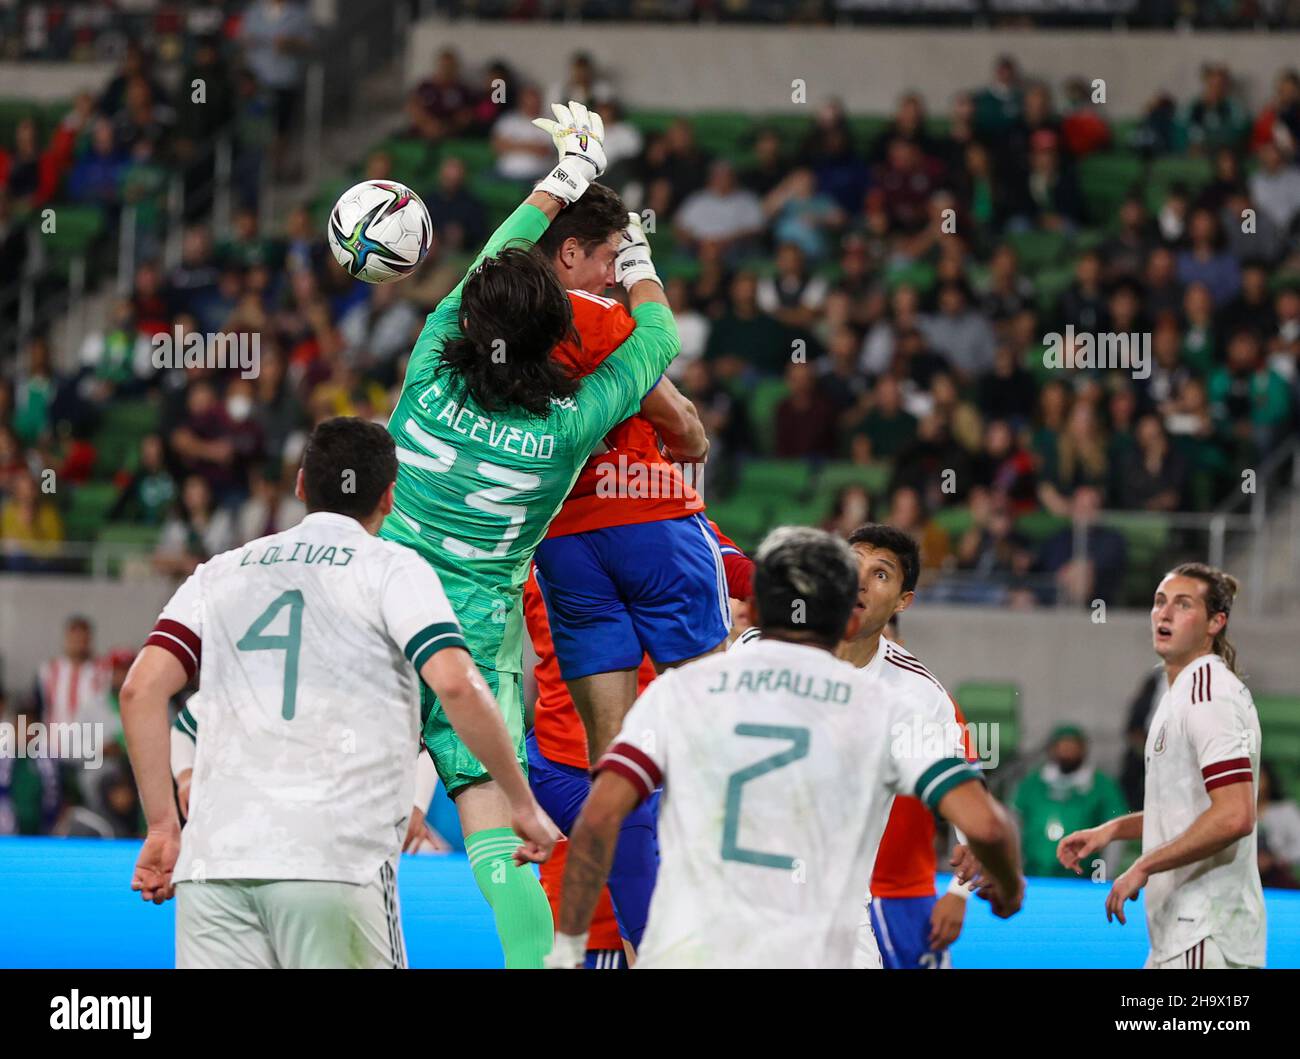 Austin, Texas, USA. December 8, 2021: Mexico goalkeeper CARLOS ACEVEDO LOPEZ's (23) hands connect with Chile forward CLEMENTE MONTES's (28) head while defending a corner kick during an international friendly soccer match between Mexico and Chile on December 8, 2021 in Austin, Texas. (Credit Image: © Scott Coleman/ZUMA Press Wire) Credit: ZUMA Press, Inc./Alamy Live News Stock Photo